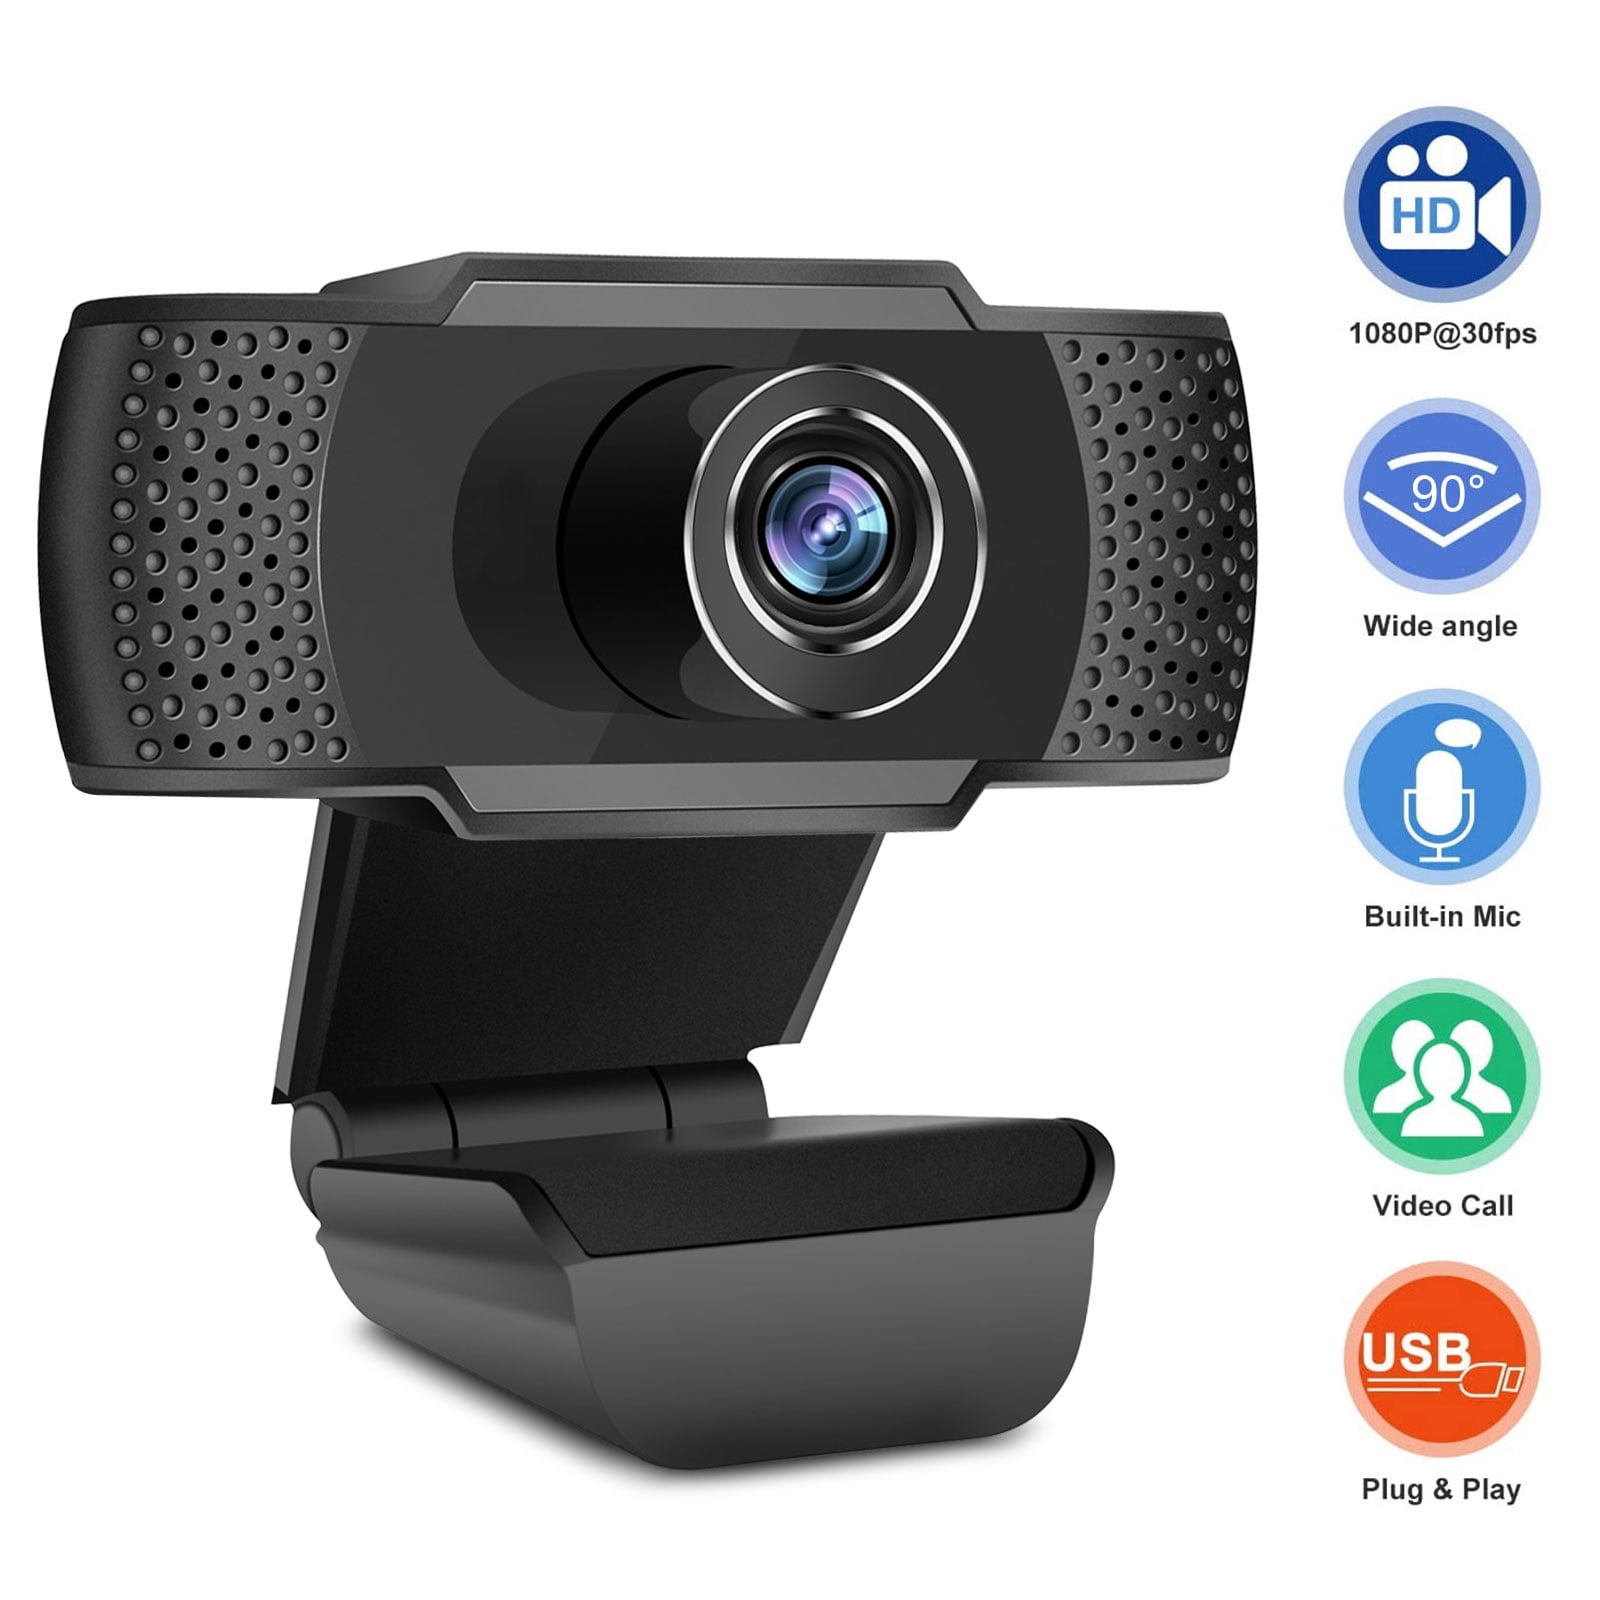 1080P HD Wired Connection Webcam with Microphone Streaming Computer Web Camera for Cam for Video Calling Conferencing Gaming Laptop Desktop Computer Camera Video Exam Class